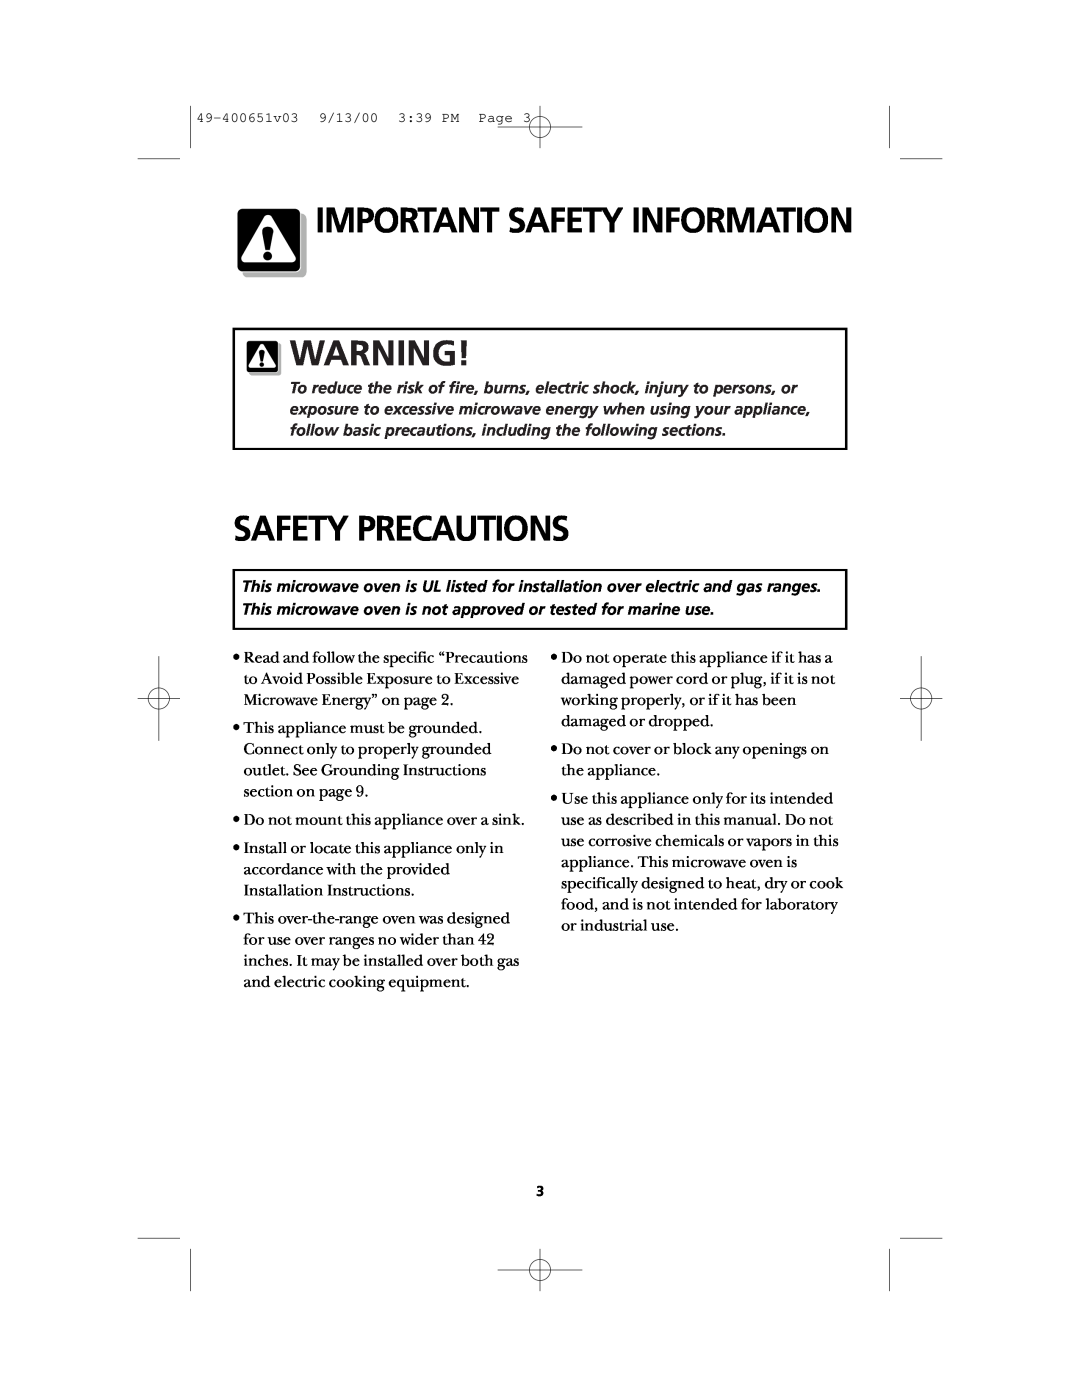 Frigidaire FMT148 warranty Safety Precautions, Important Safety Information, Do not mount this appliance over a sink 